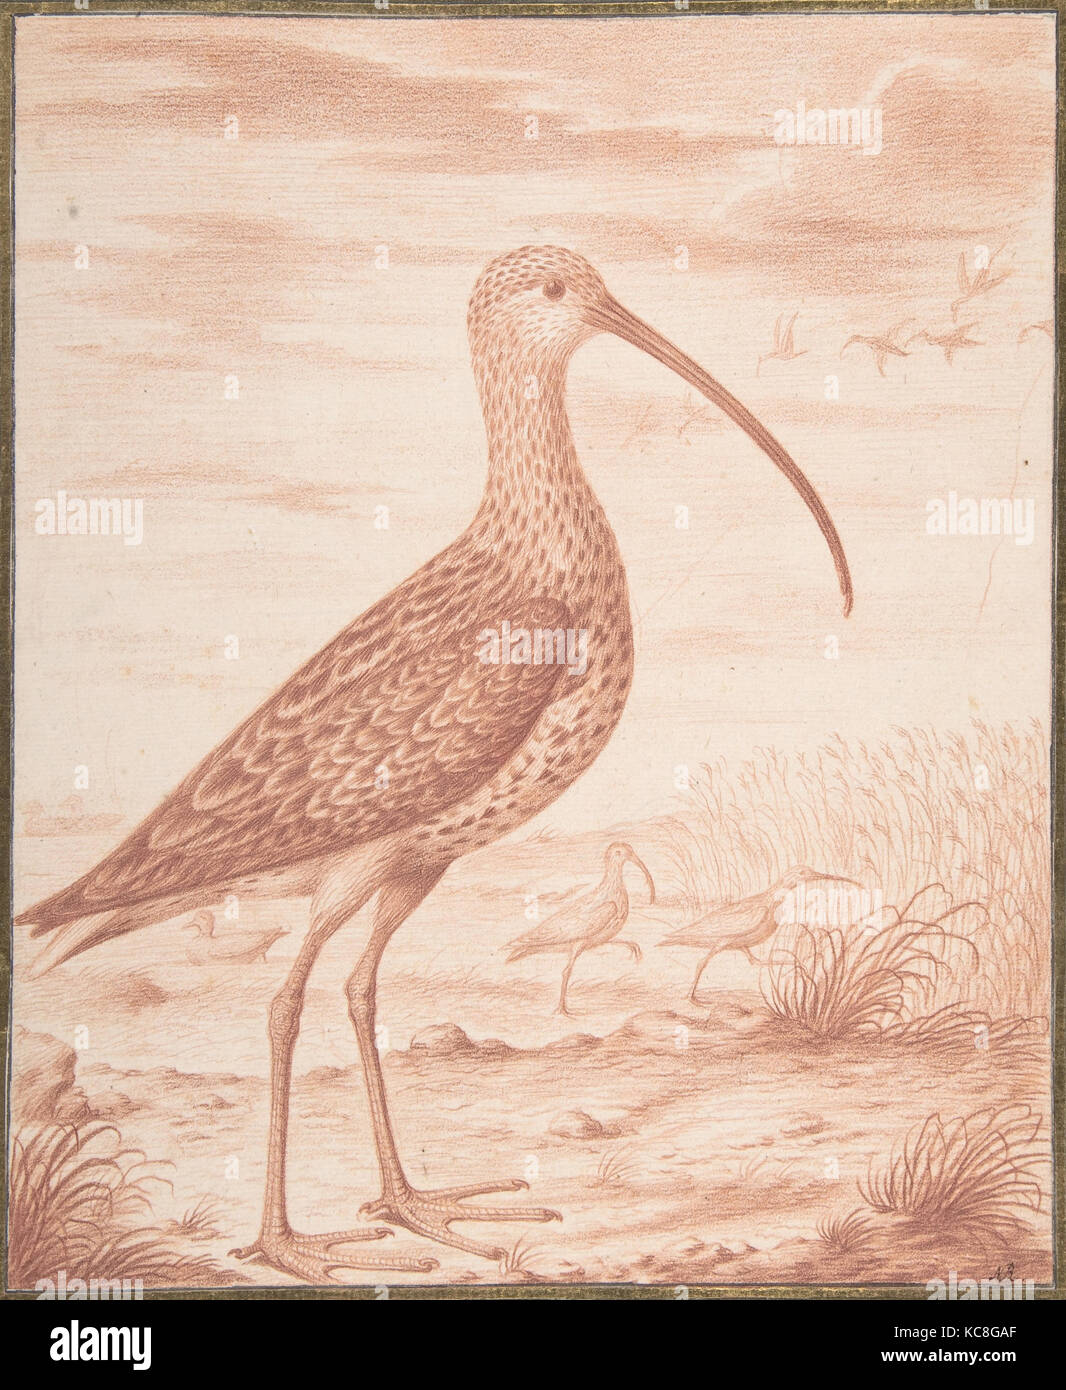 Curlews and Ducks, 17th century, Red chalk, 8 15/16 x 7 5/16 in. (22.7 x 18.6 cm), Drawings, Nicolas Robert (French, Langres Stock Photo